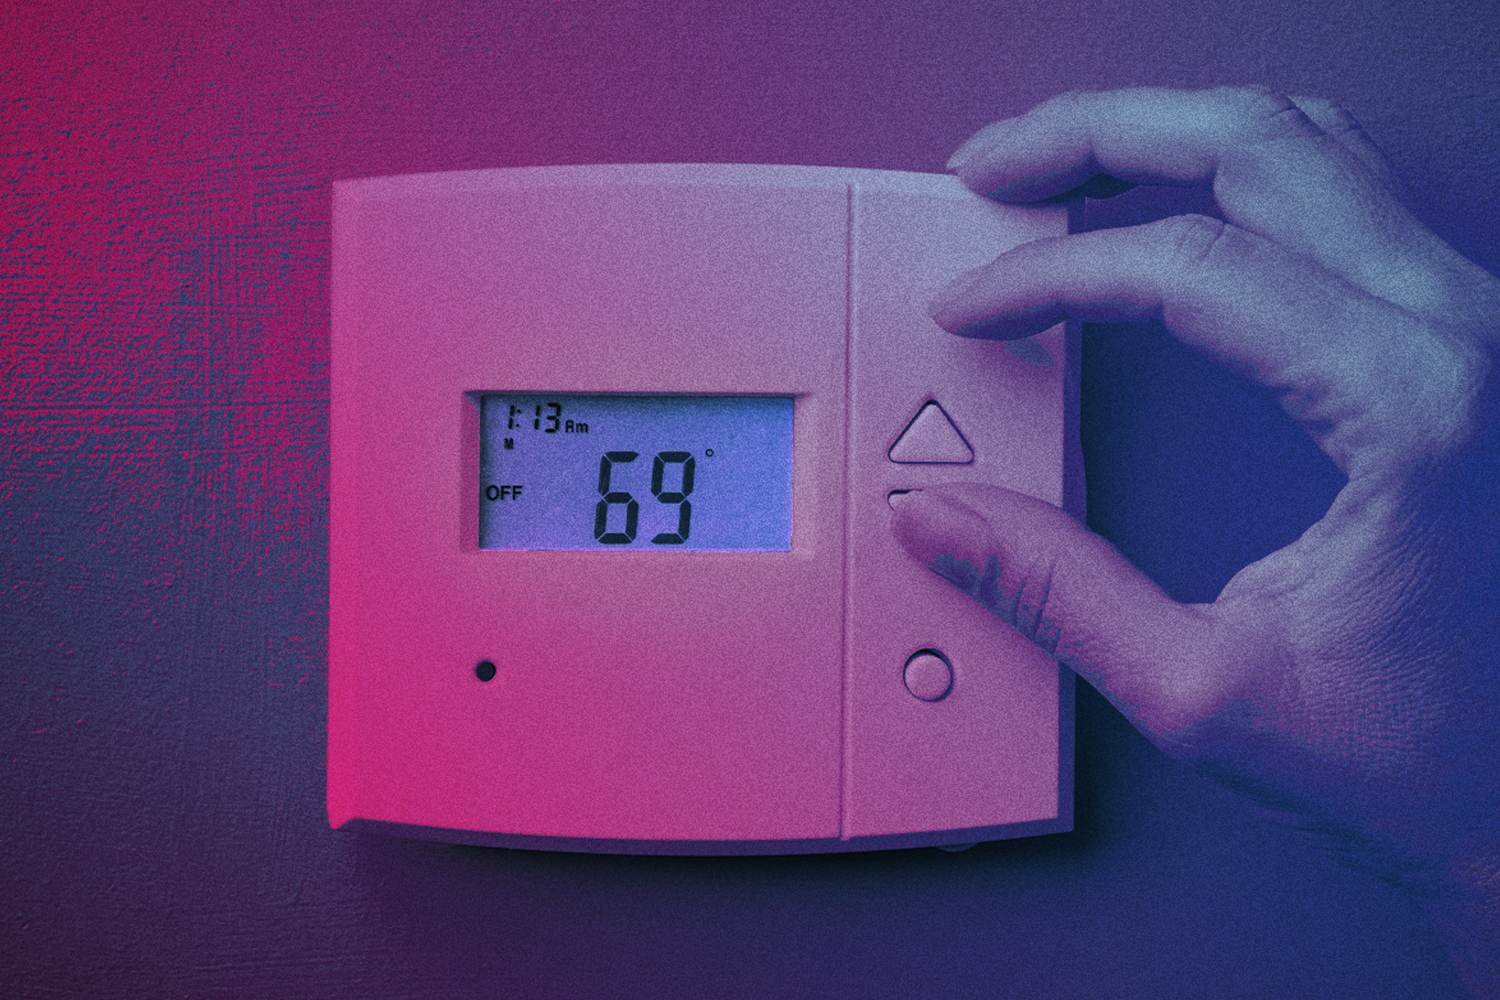 Photo shows thermostat set to 69 degrees